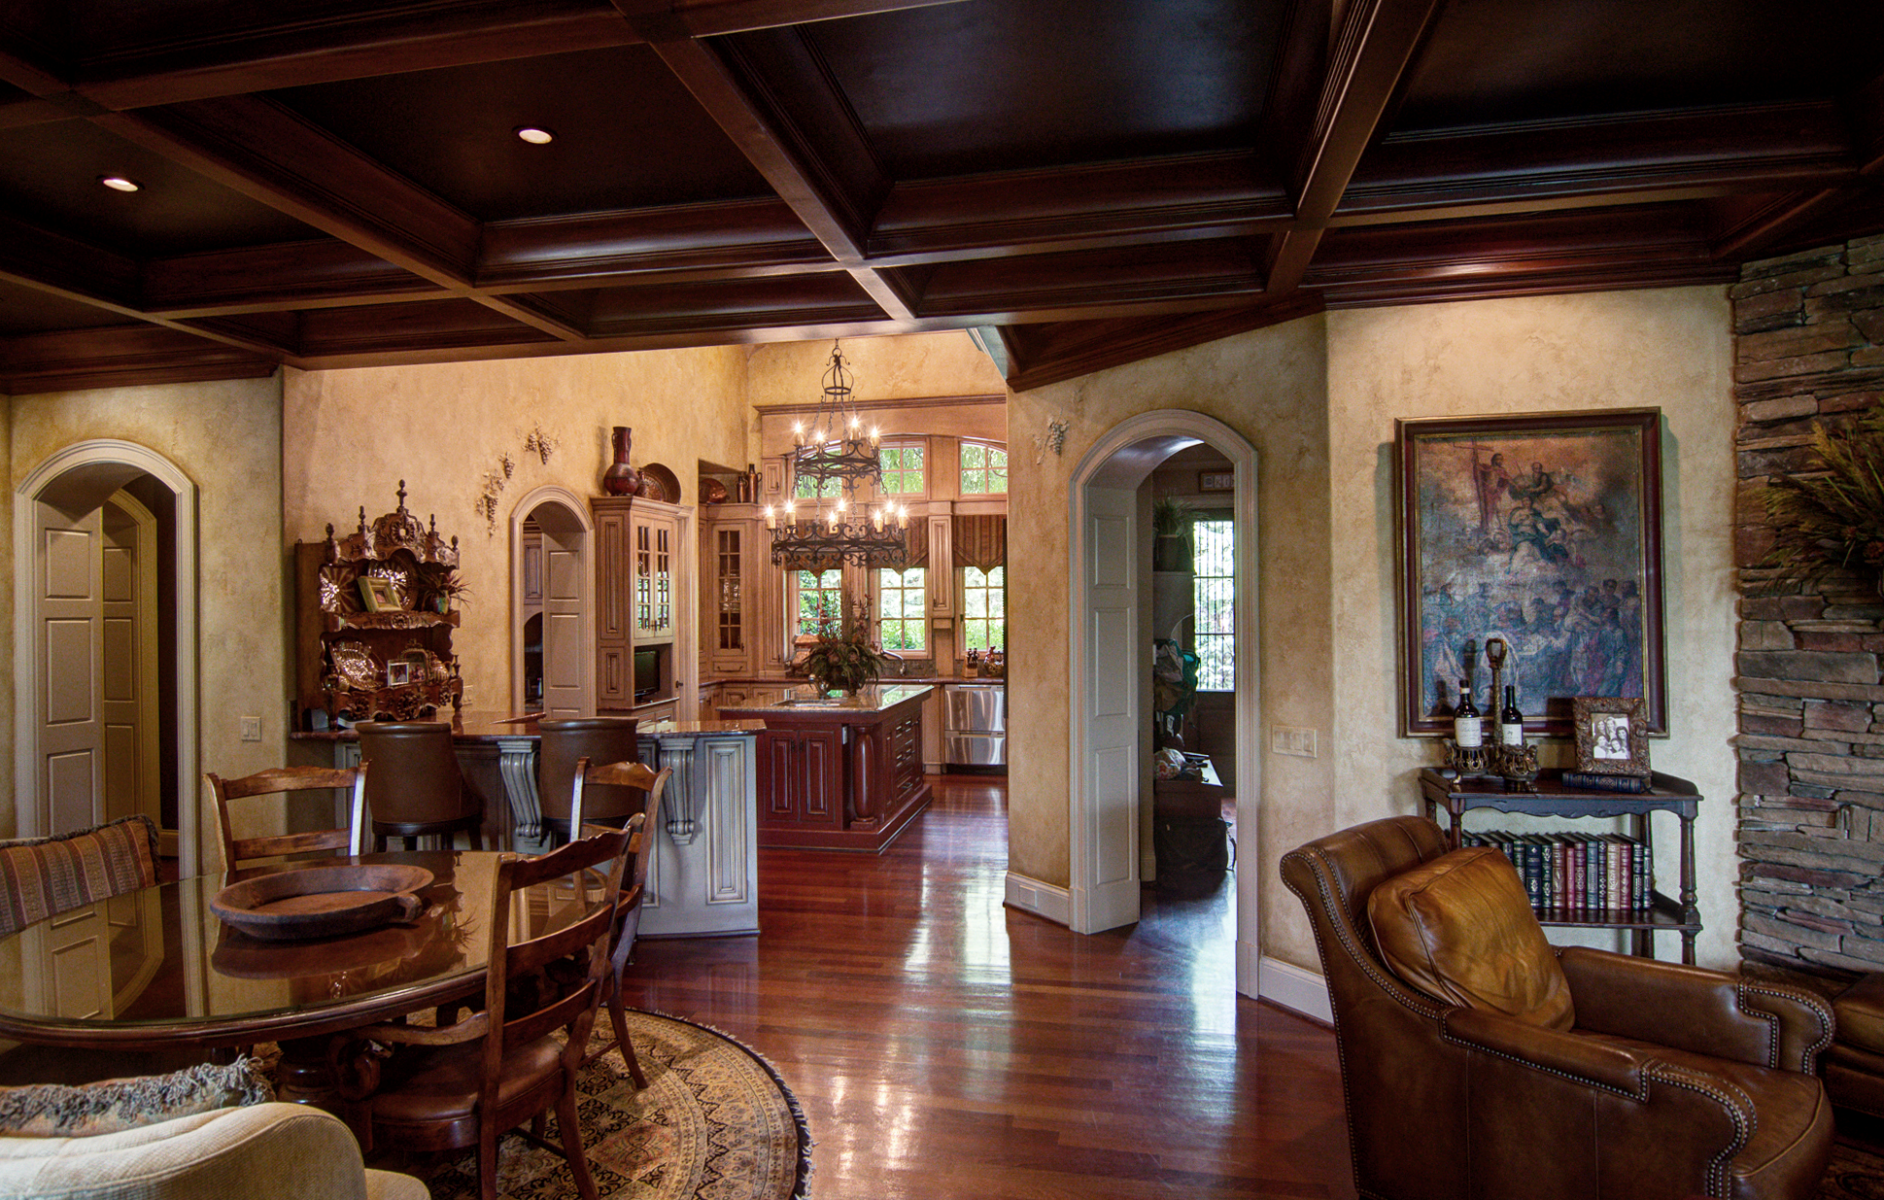 Wood grained ceiling, Tuscan plaster walls against warm glazed cabinetry.